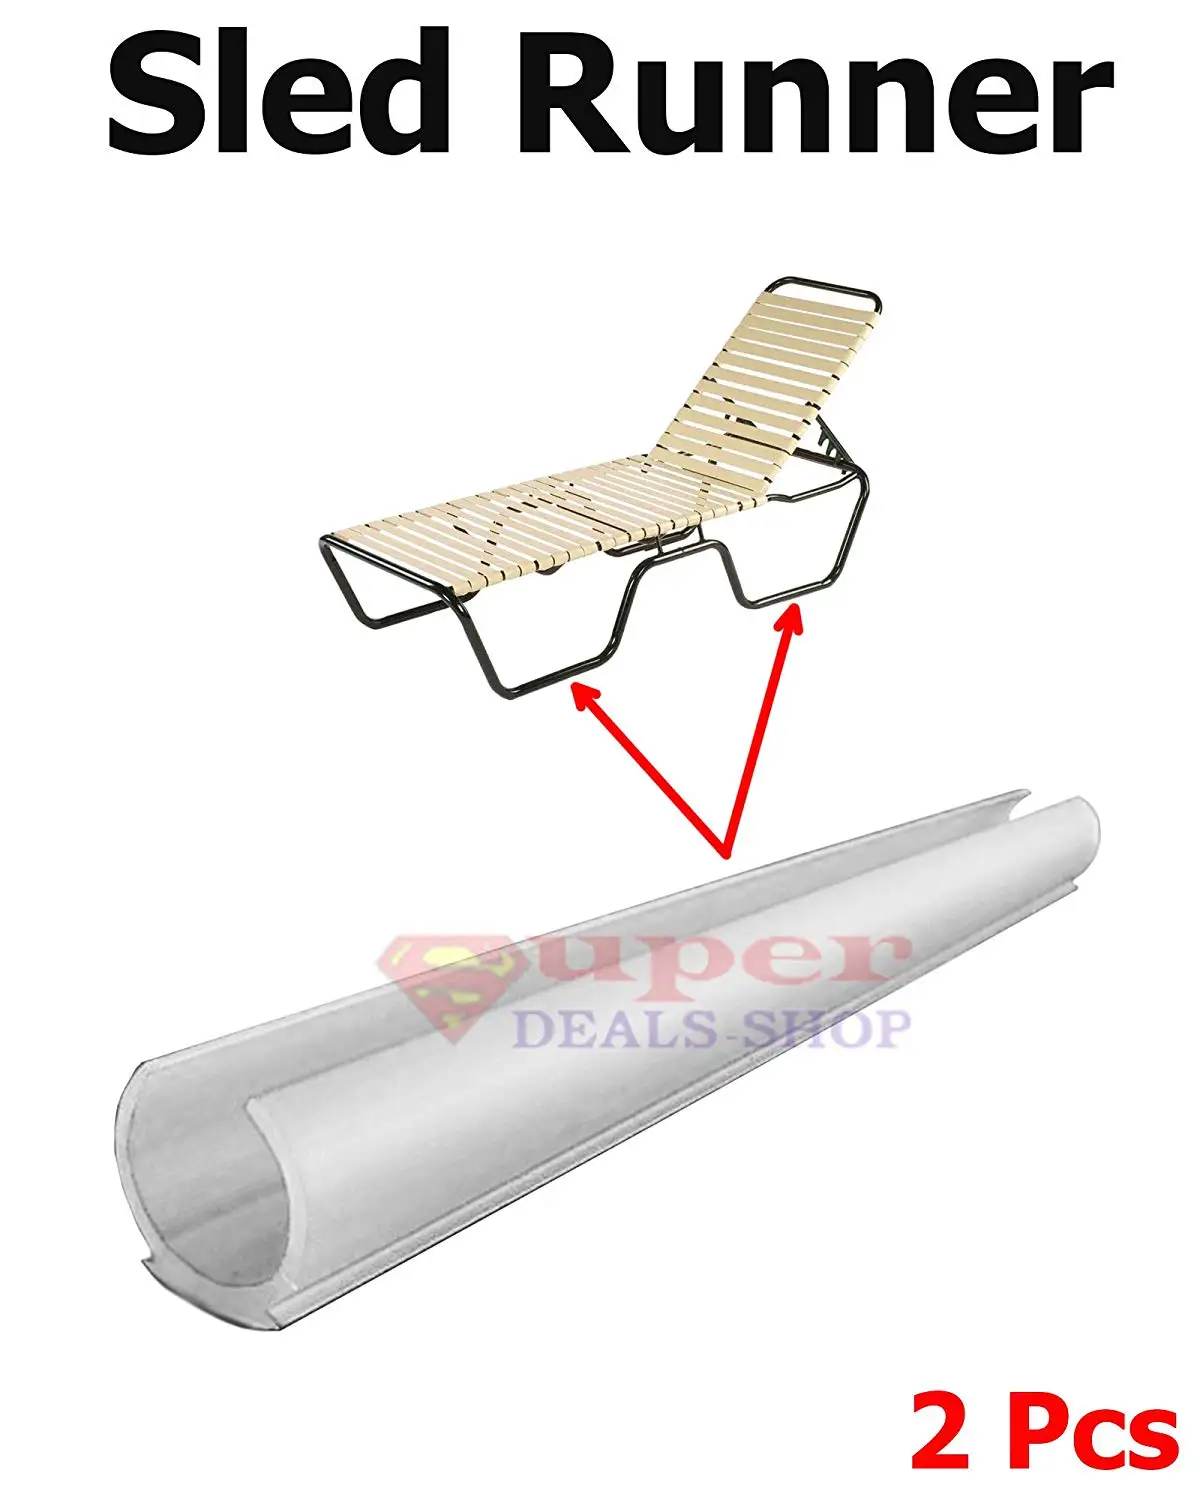 Cheap Sled Chair Glides, find Sled Chair Glides deals on line at